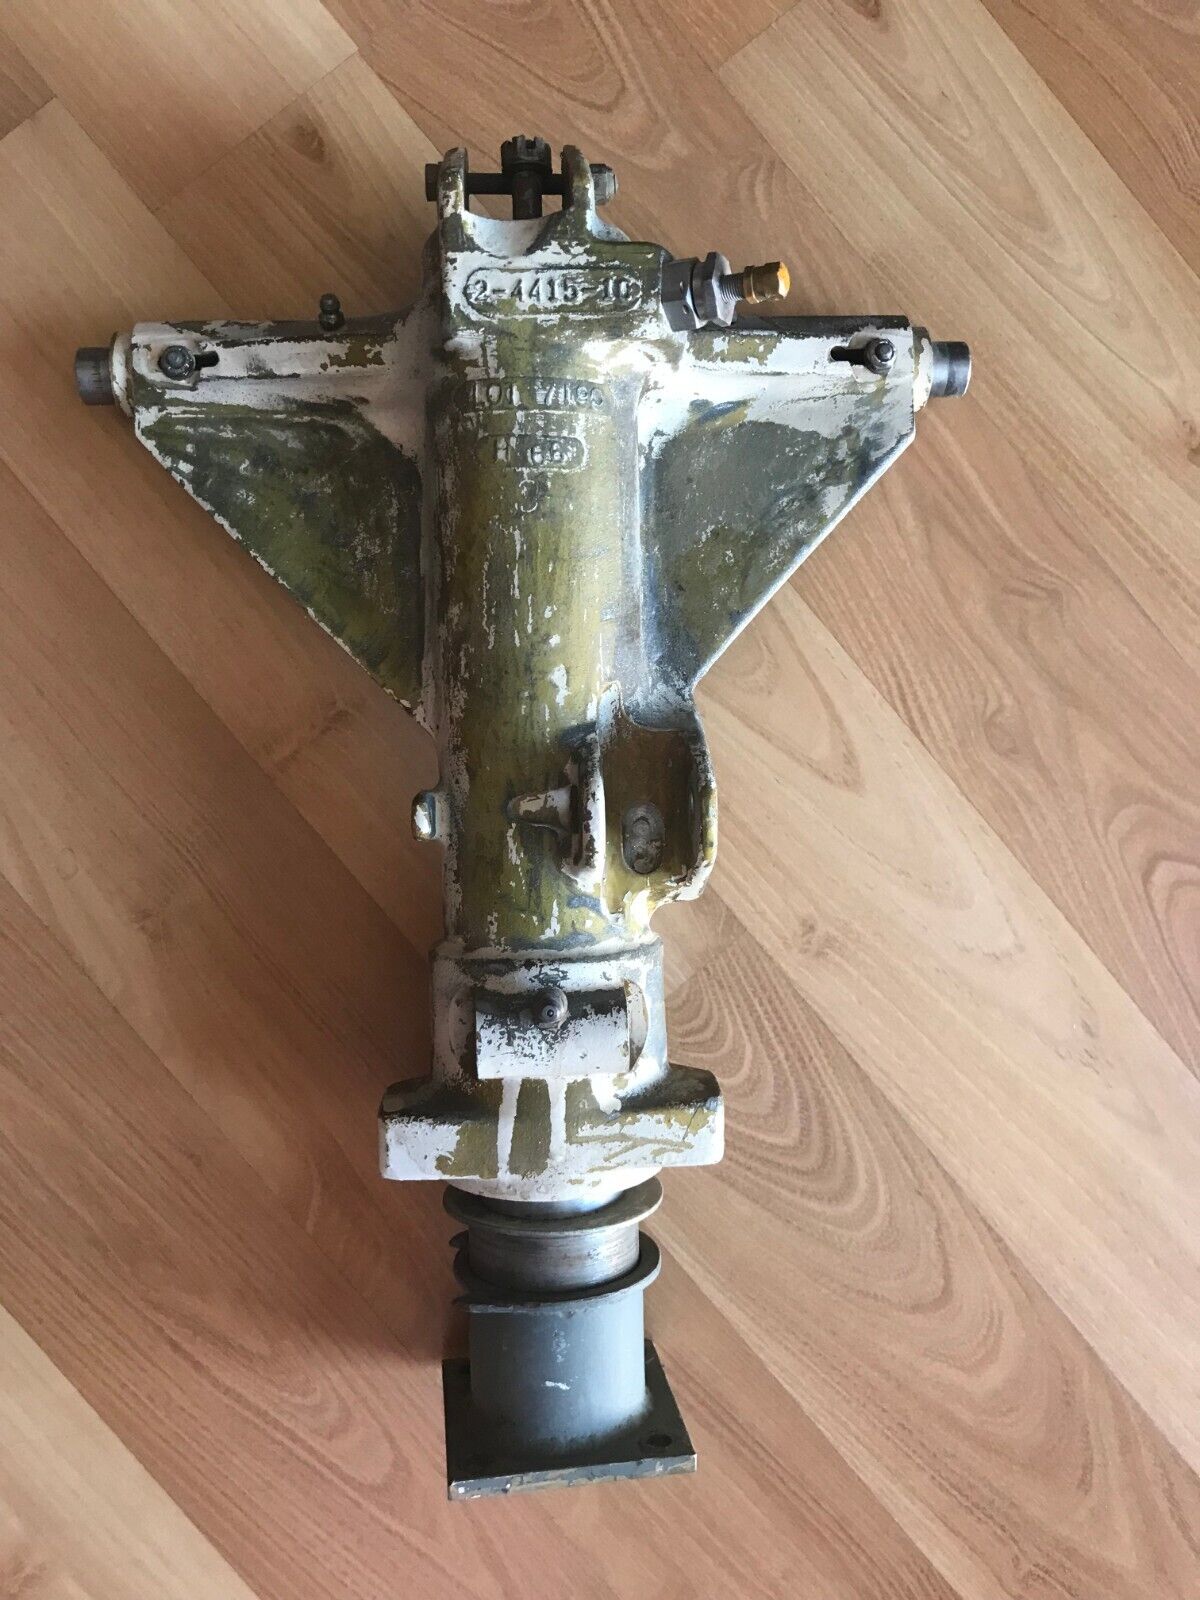 Pre-Owned Lake Amphibian Buccaneer Aircraft Nose Gear Assembly 2-4415-10